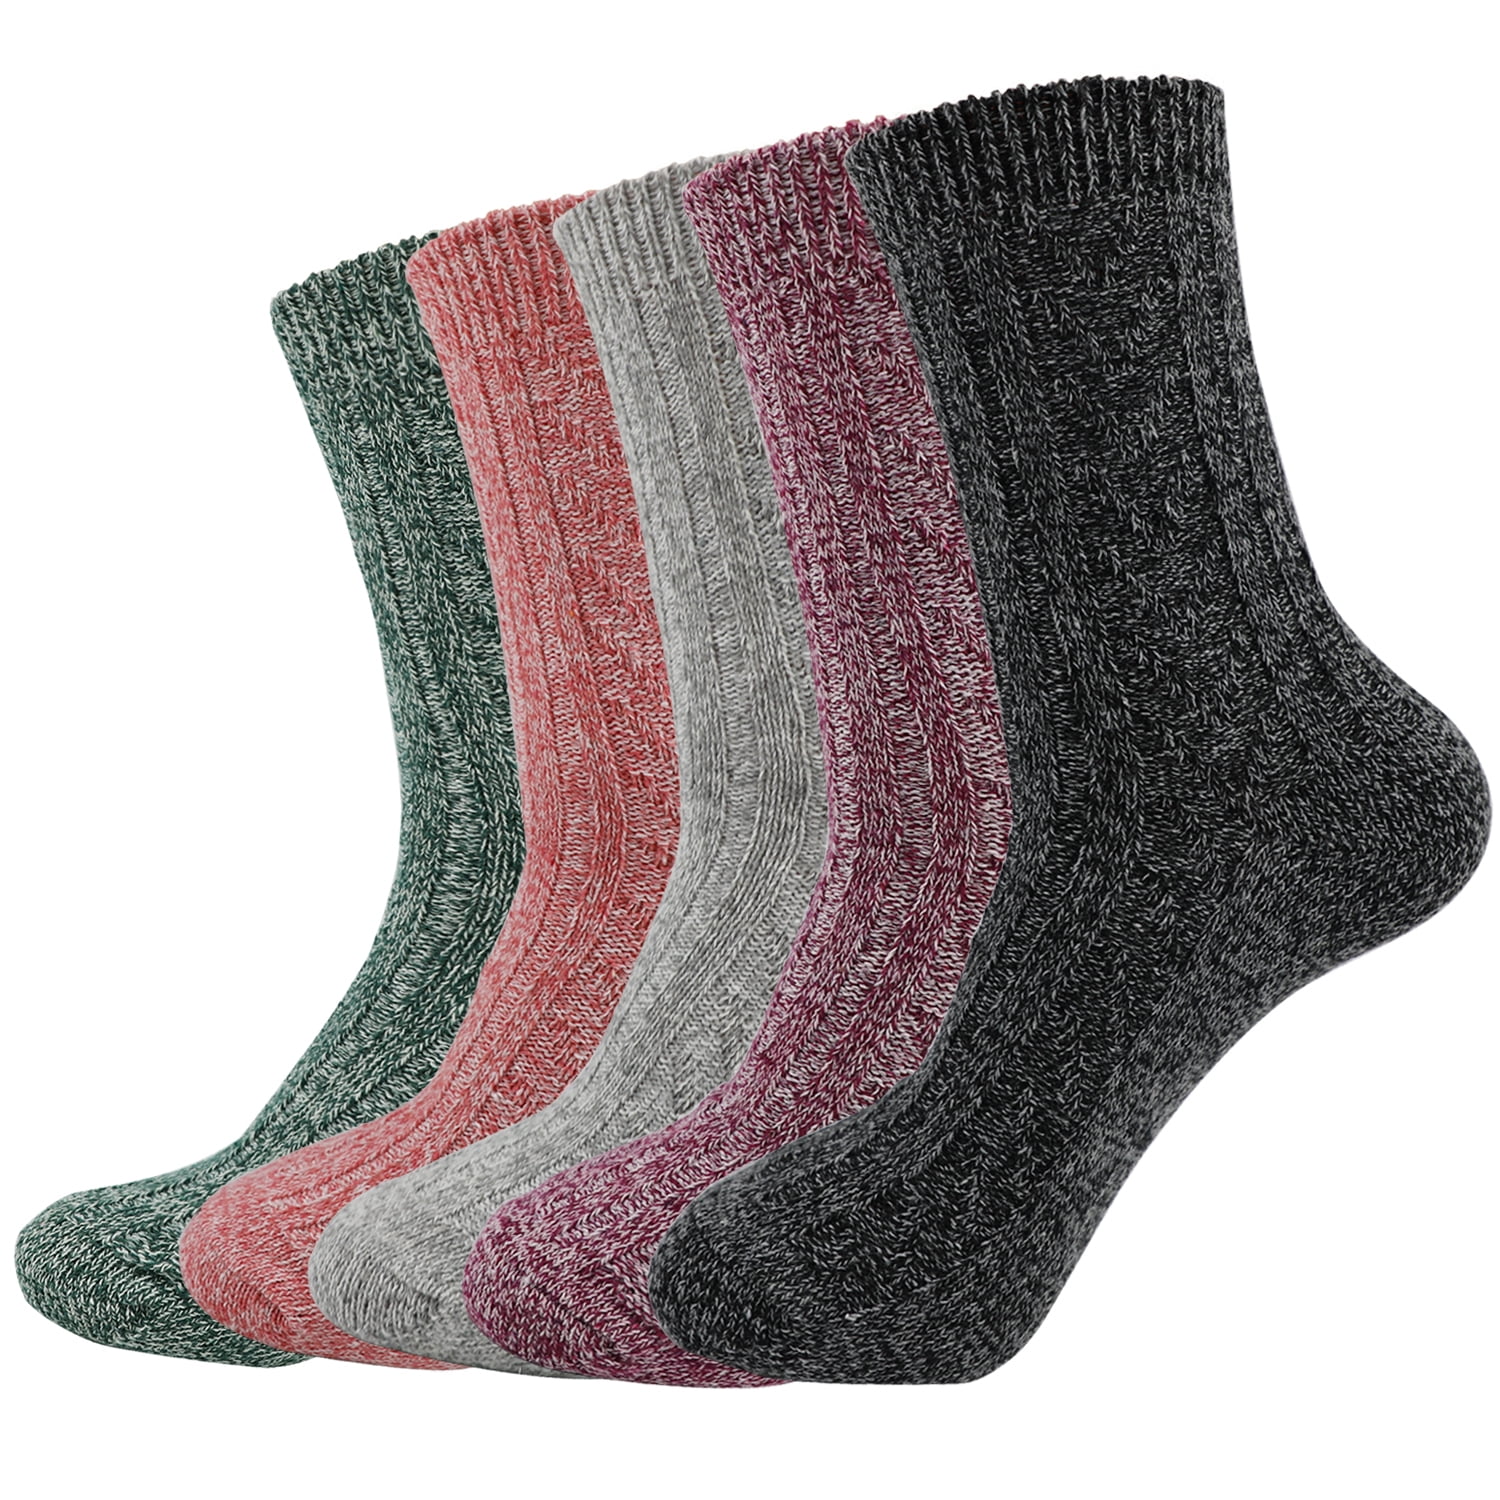 5 Pairs Womens Wool Cashmere Thick Sock Lady Soft Casual Winter Thermal Socks US 